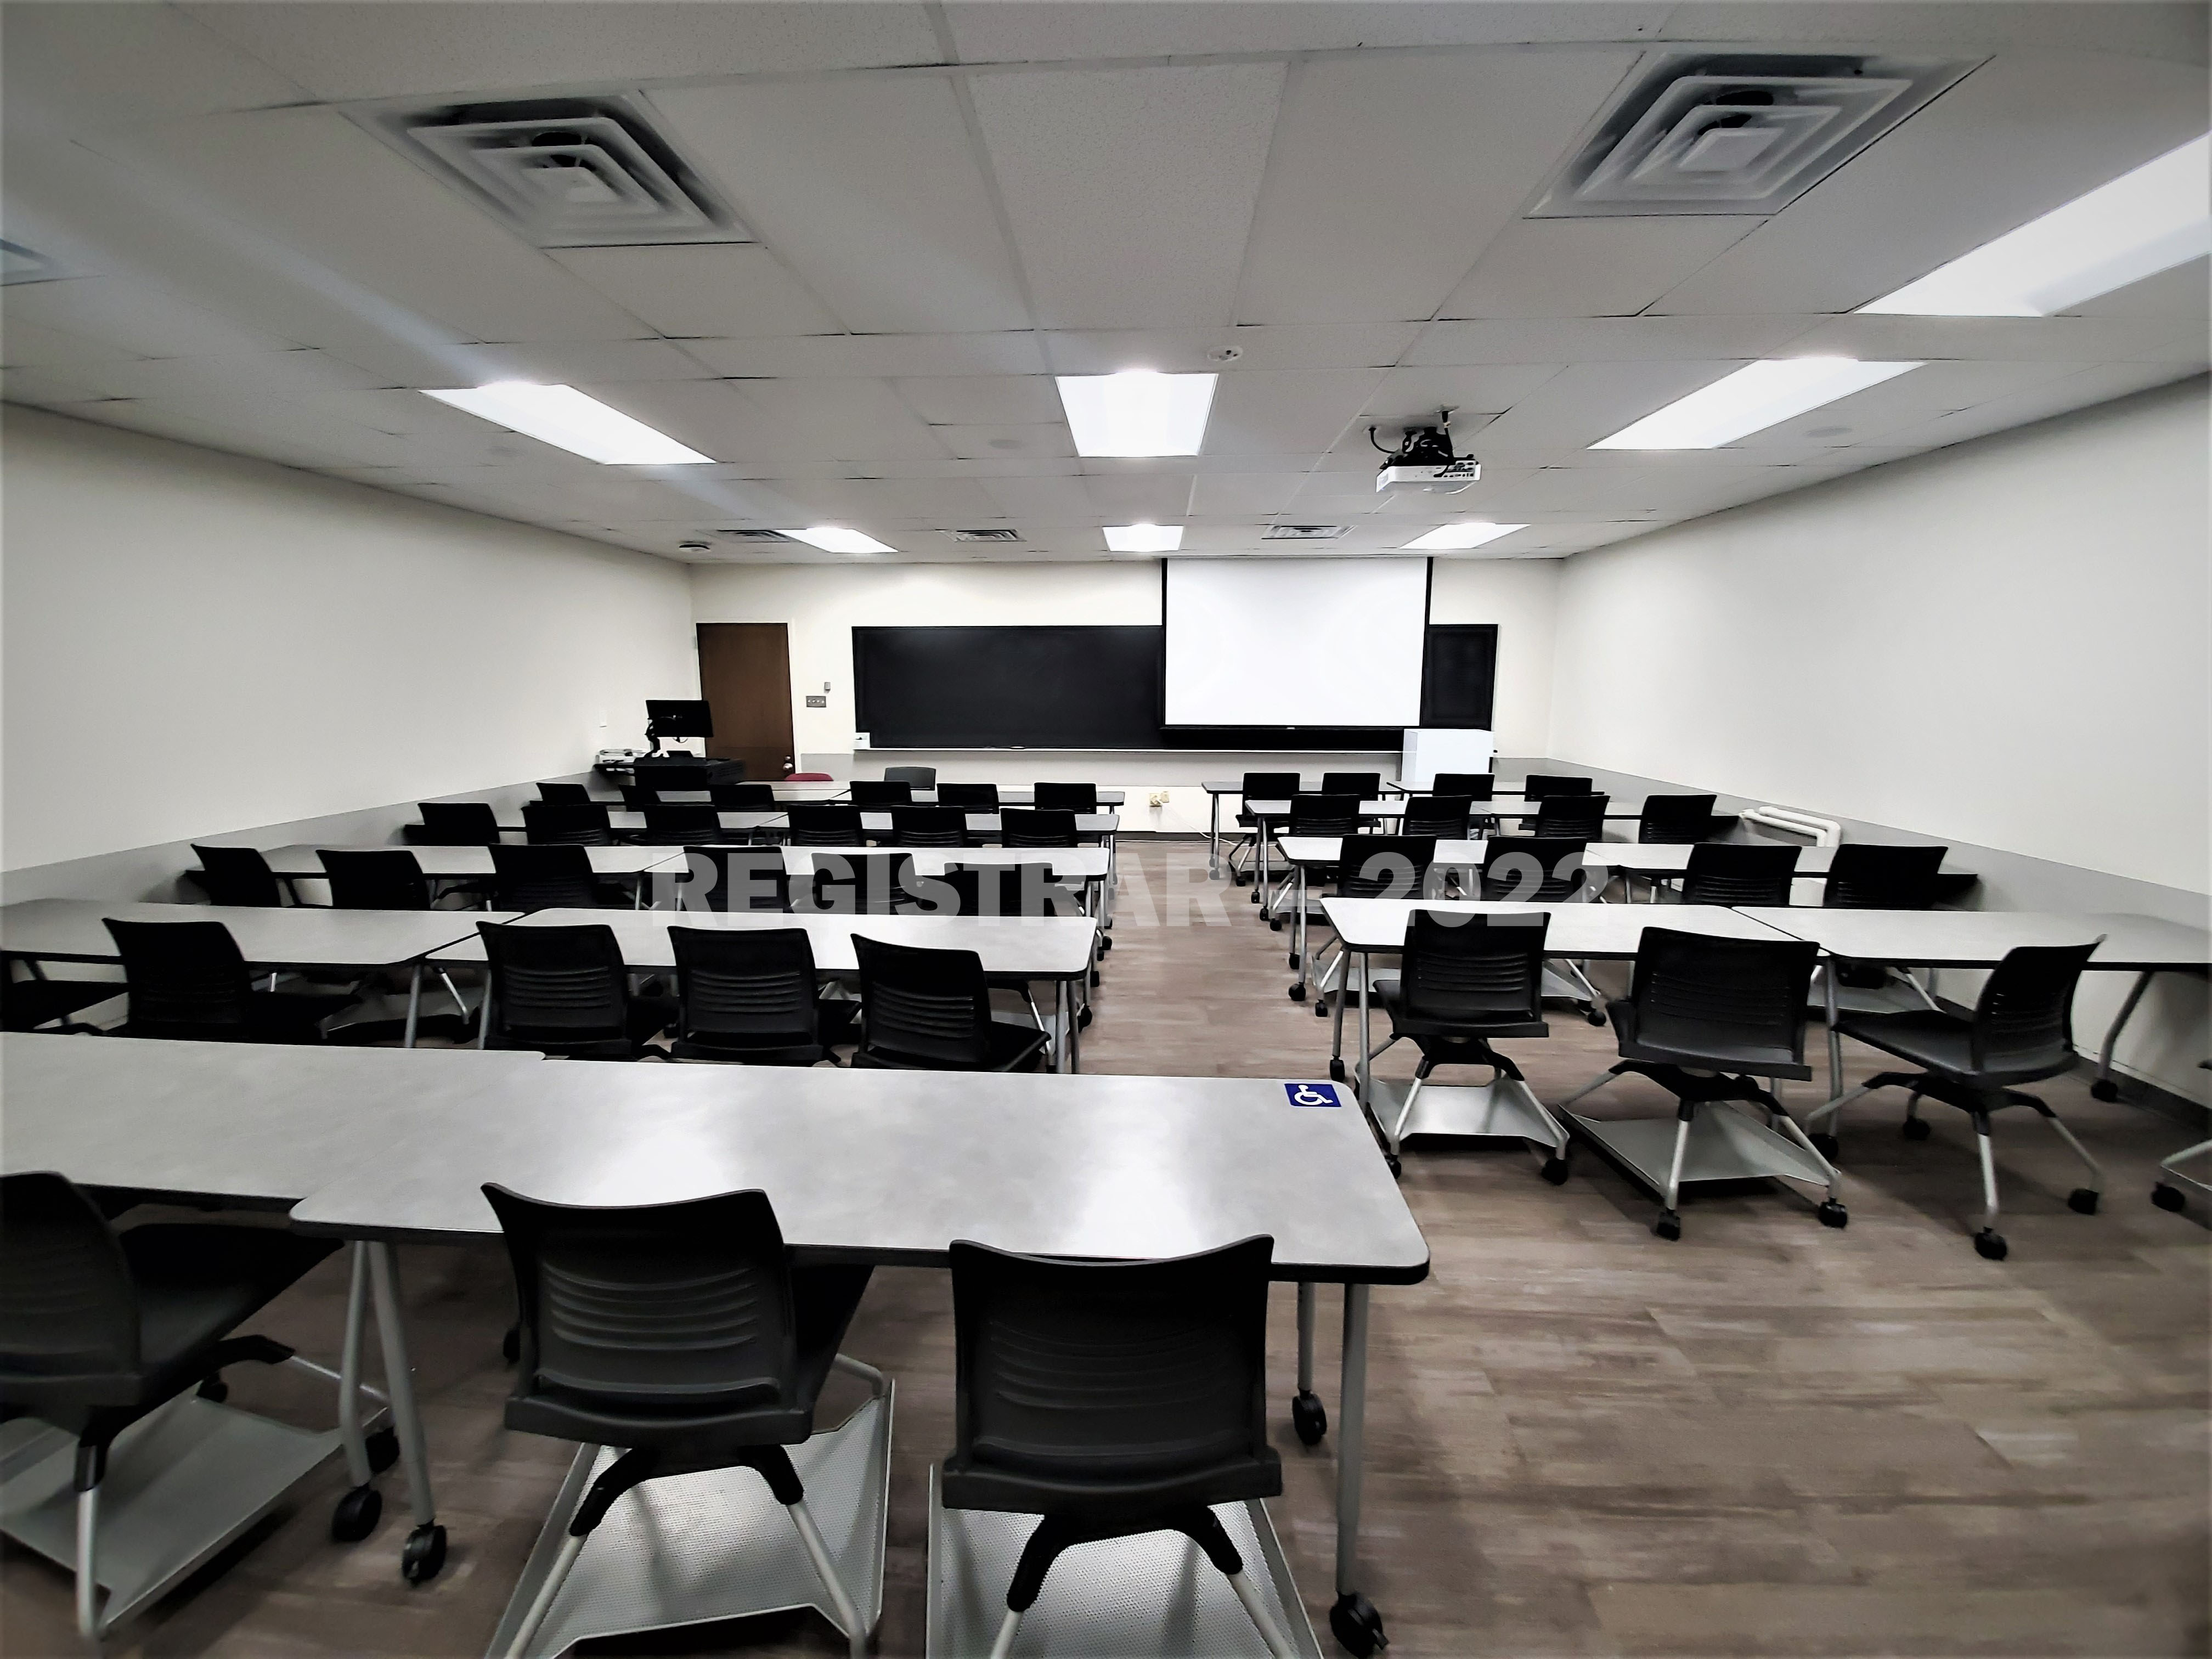 Dreese Lab room 357 ultra wide angle view from the back of the room with projector screen down